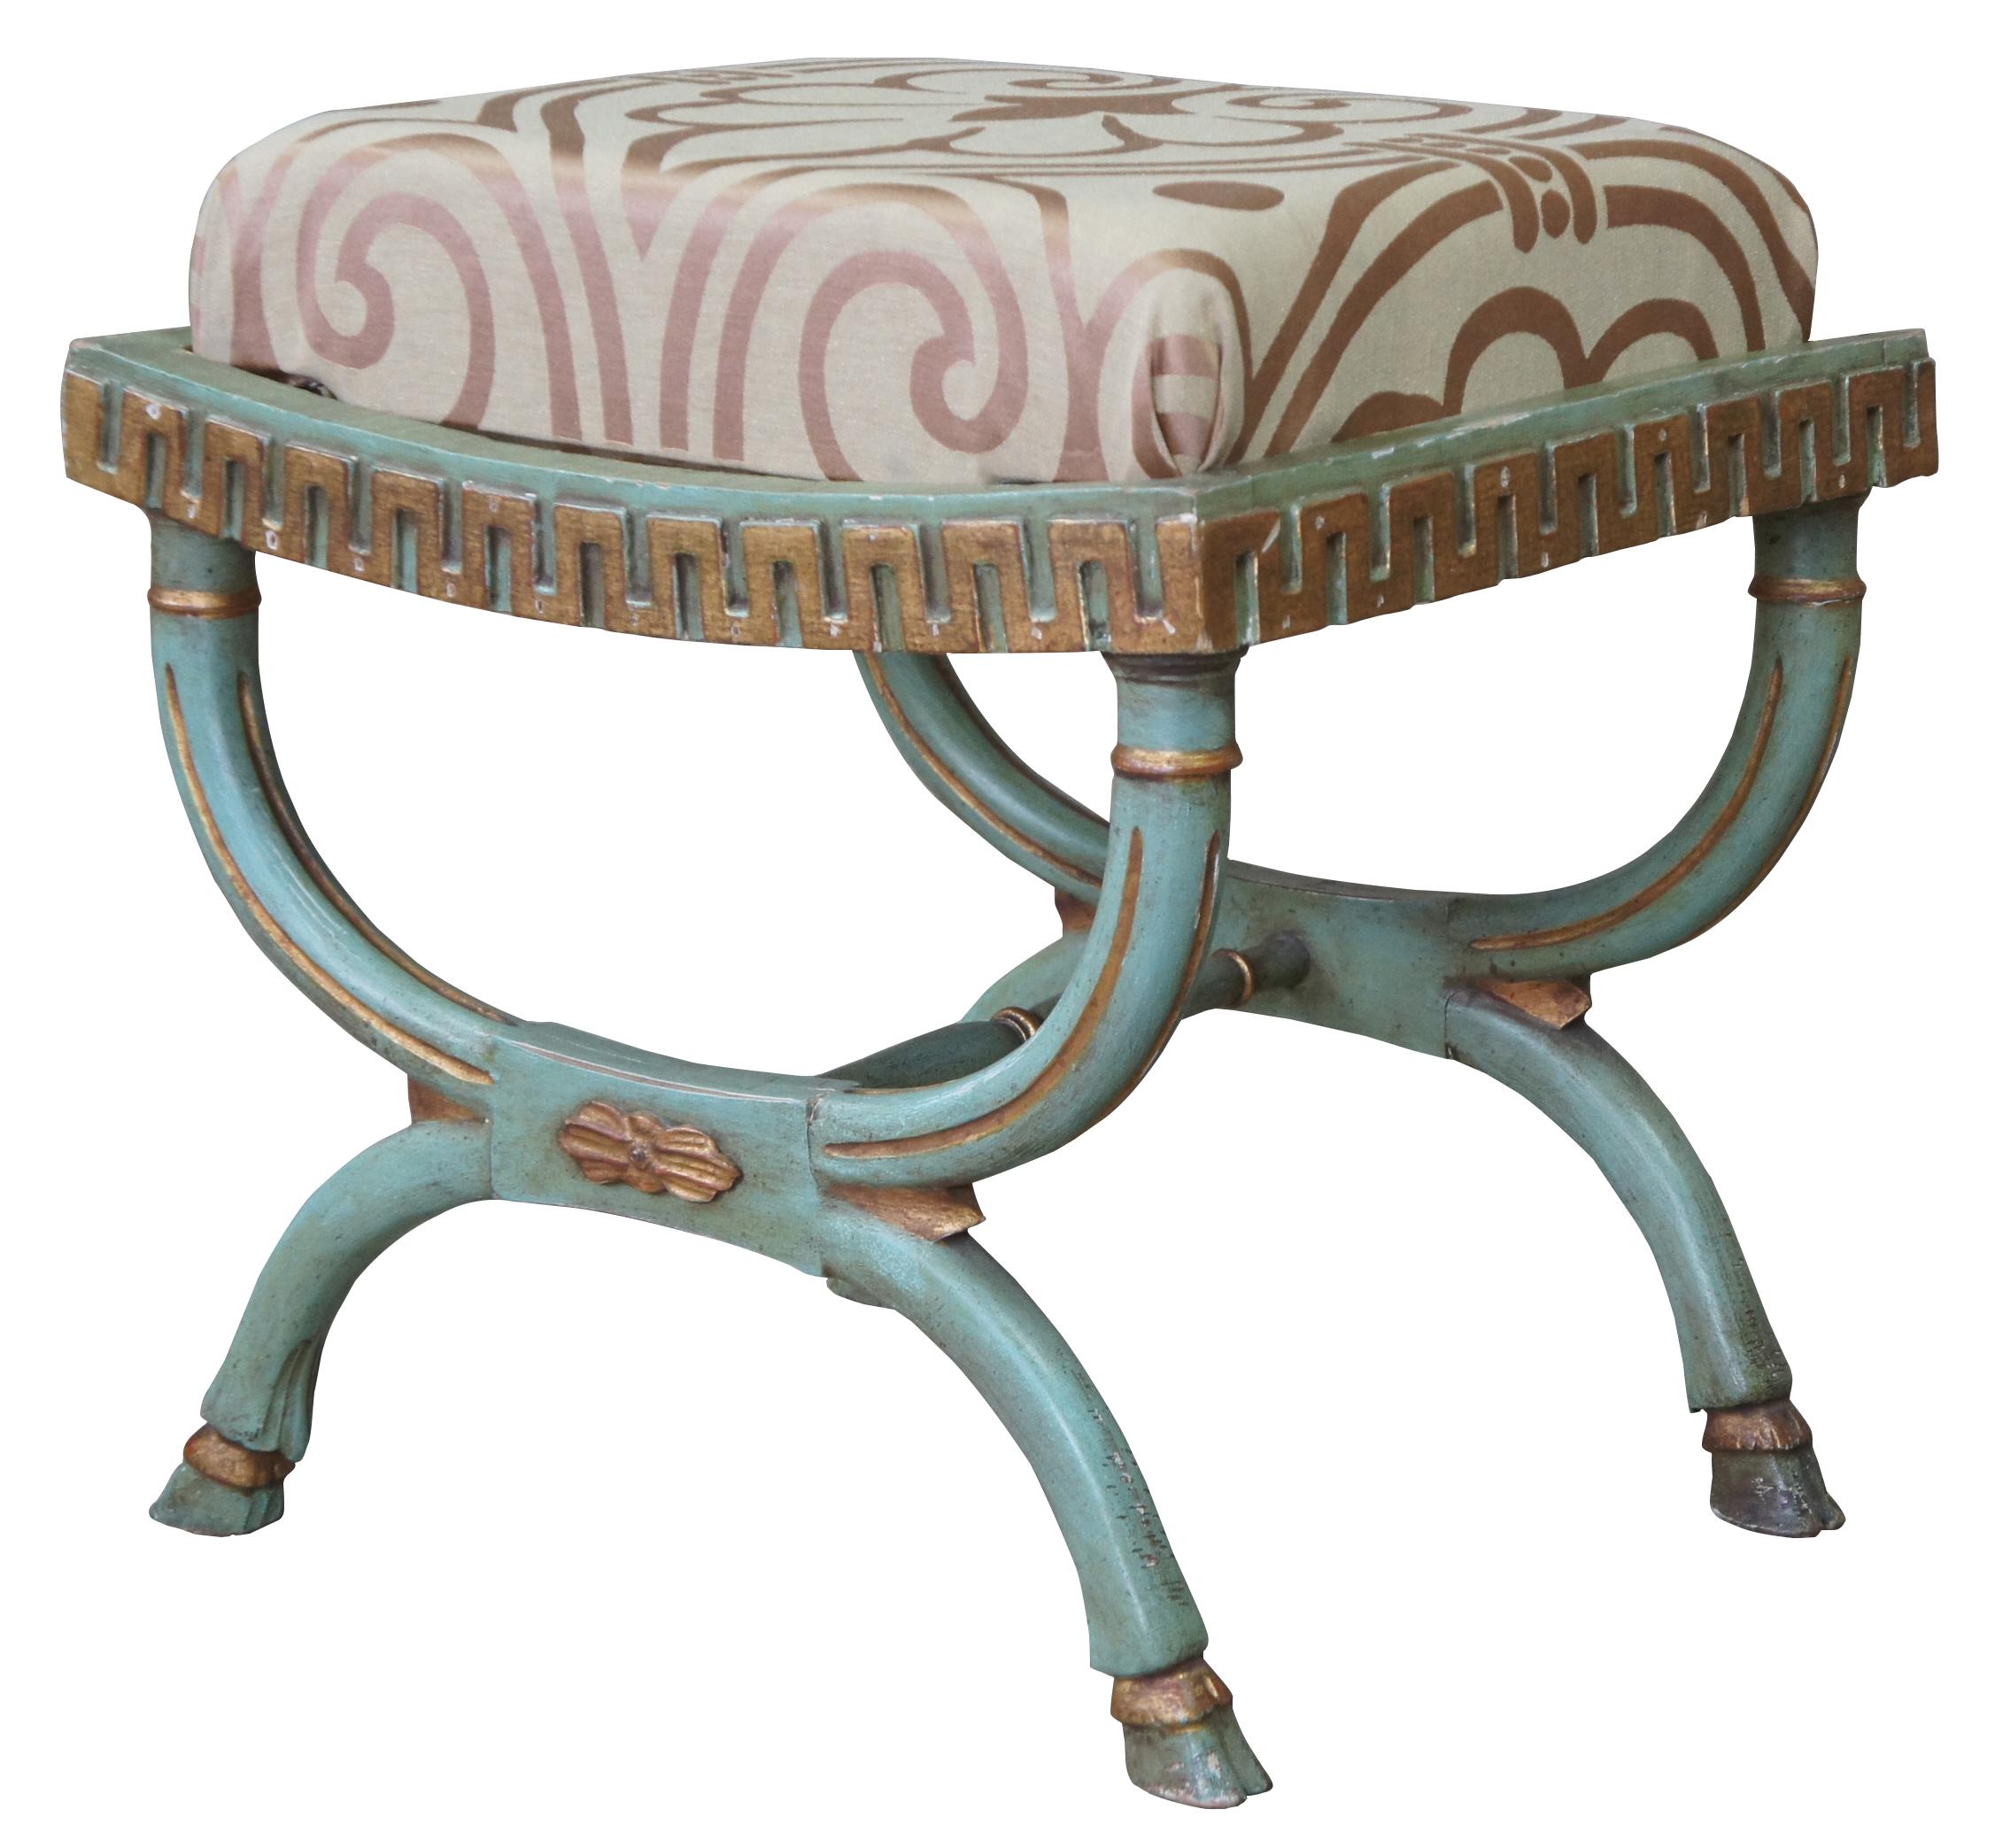 Early 20th century antique French Empire style foot stool or bench. A Bohemian green featuring the classical French X form with gold fluting and hoof feet. Upholstered with a fleur de lis fabric. Measures: 21”.
  